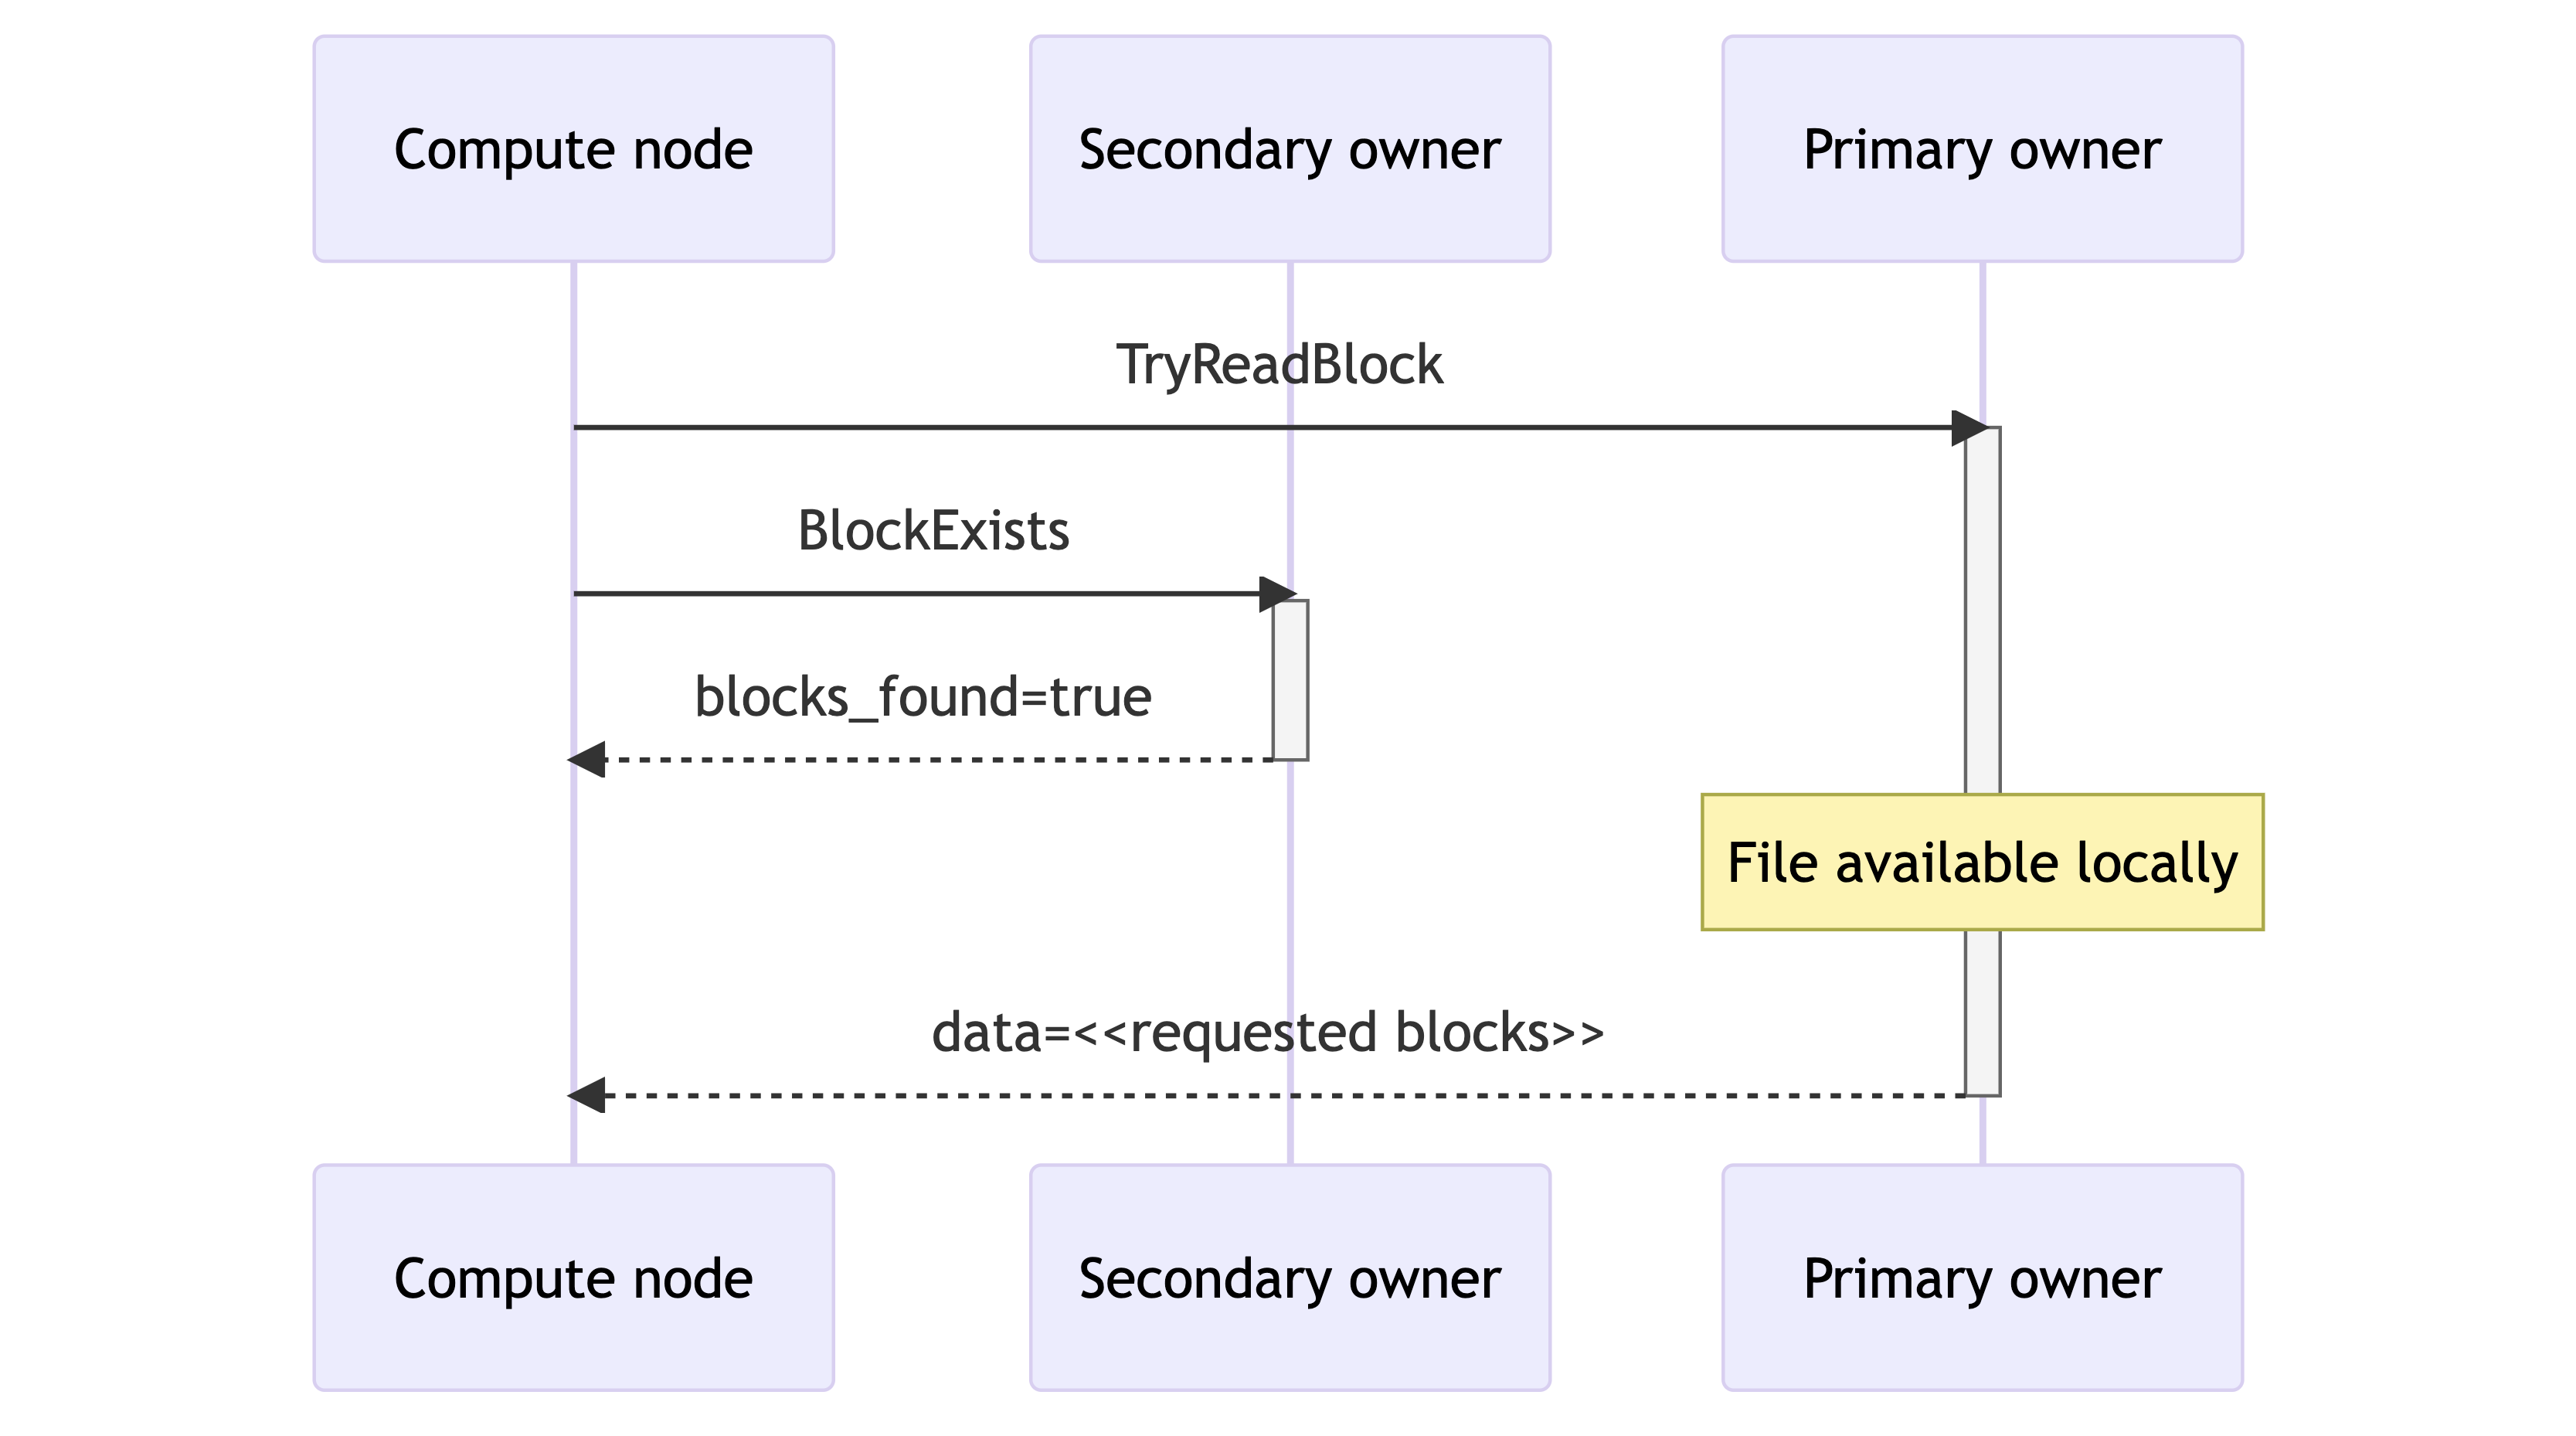 Rockset avoids accessing S3 at query time using an optimistic search protocol. In most cases, the primary owner has the requested file and returns the data blocks.